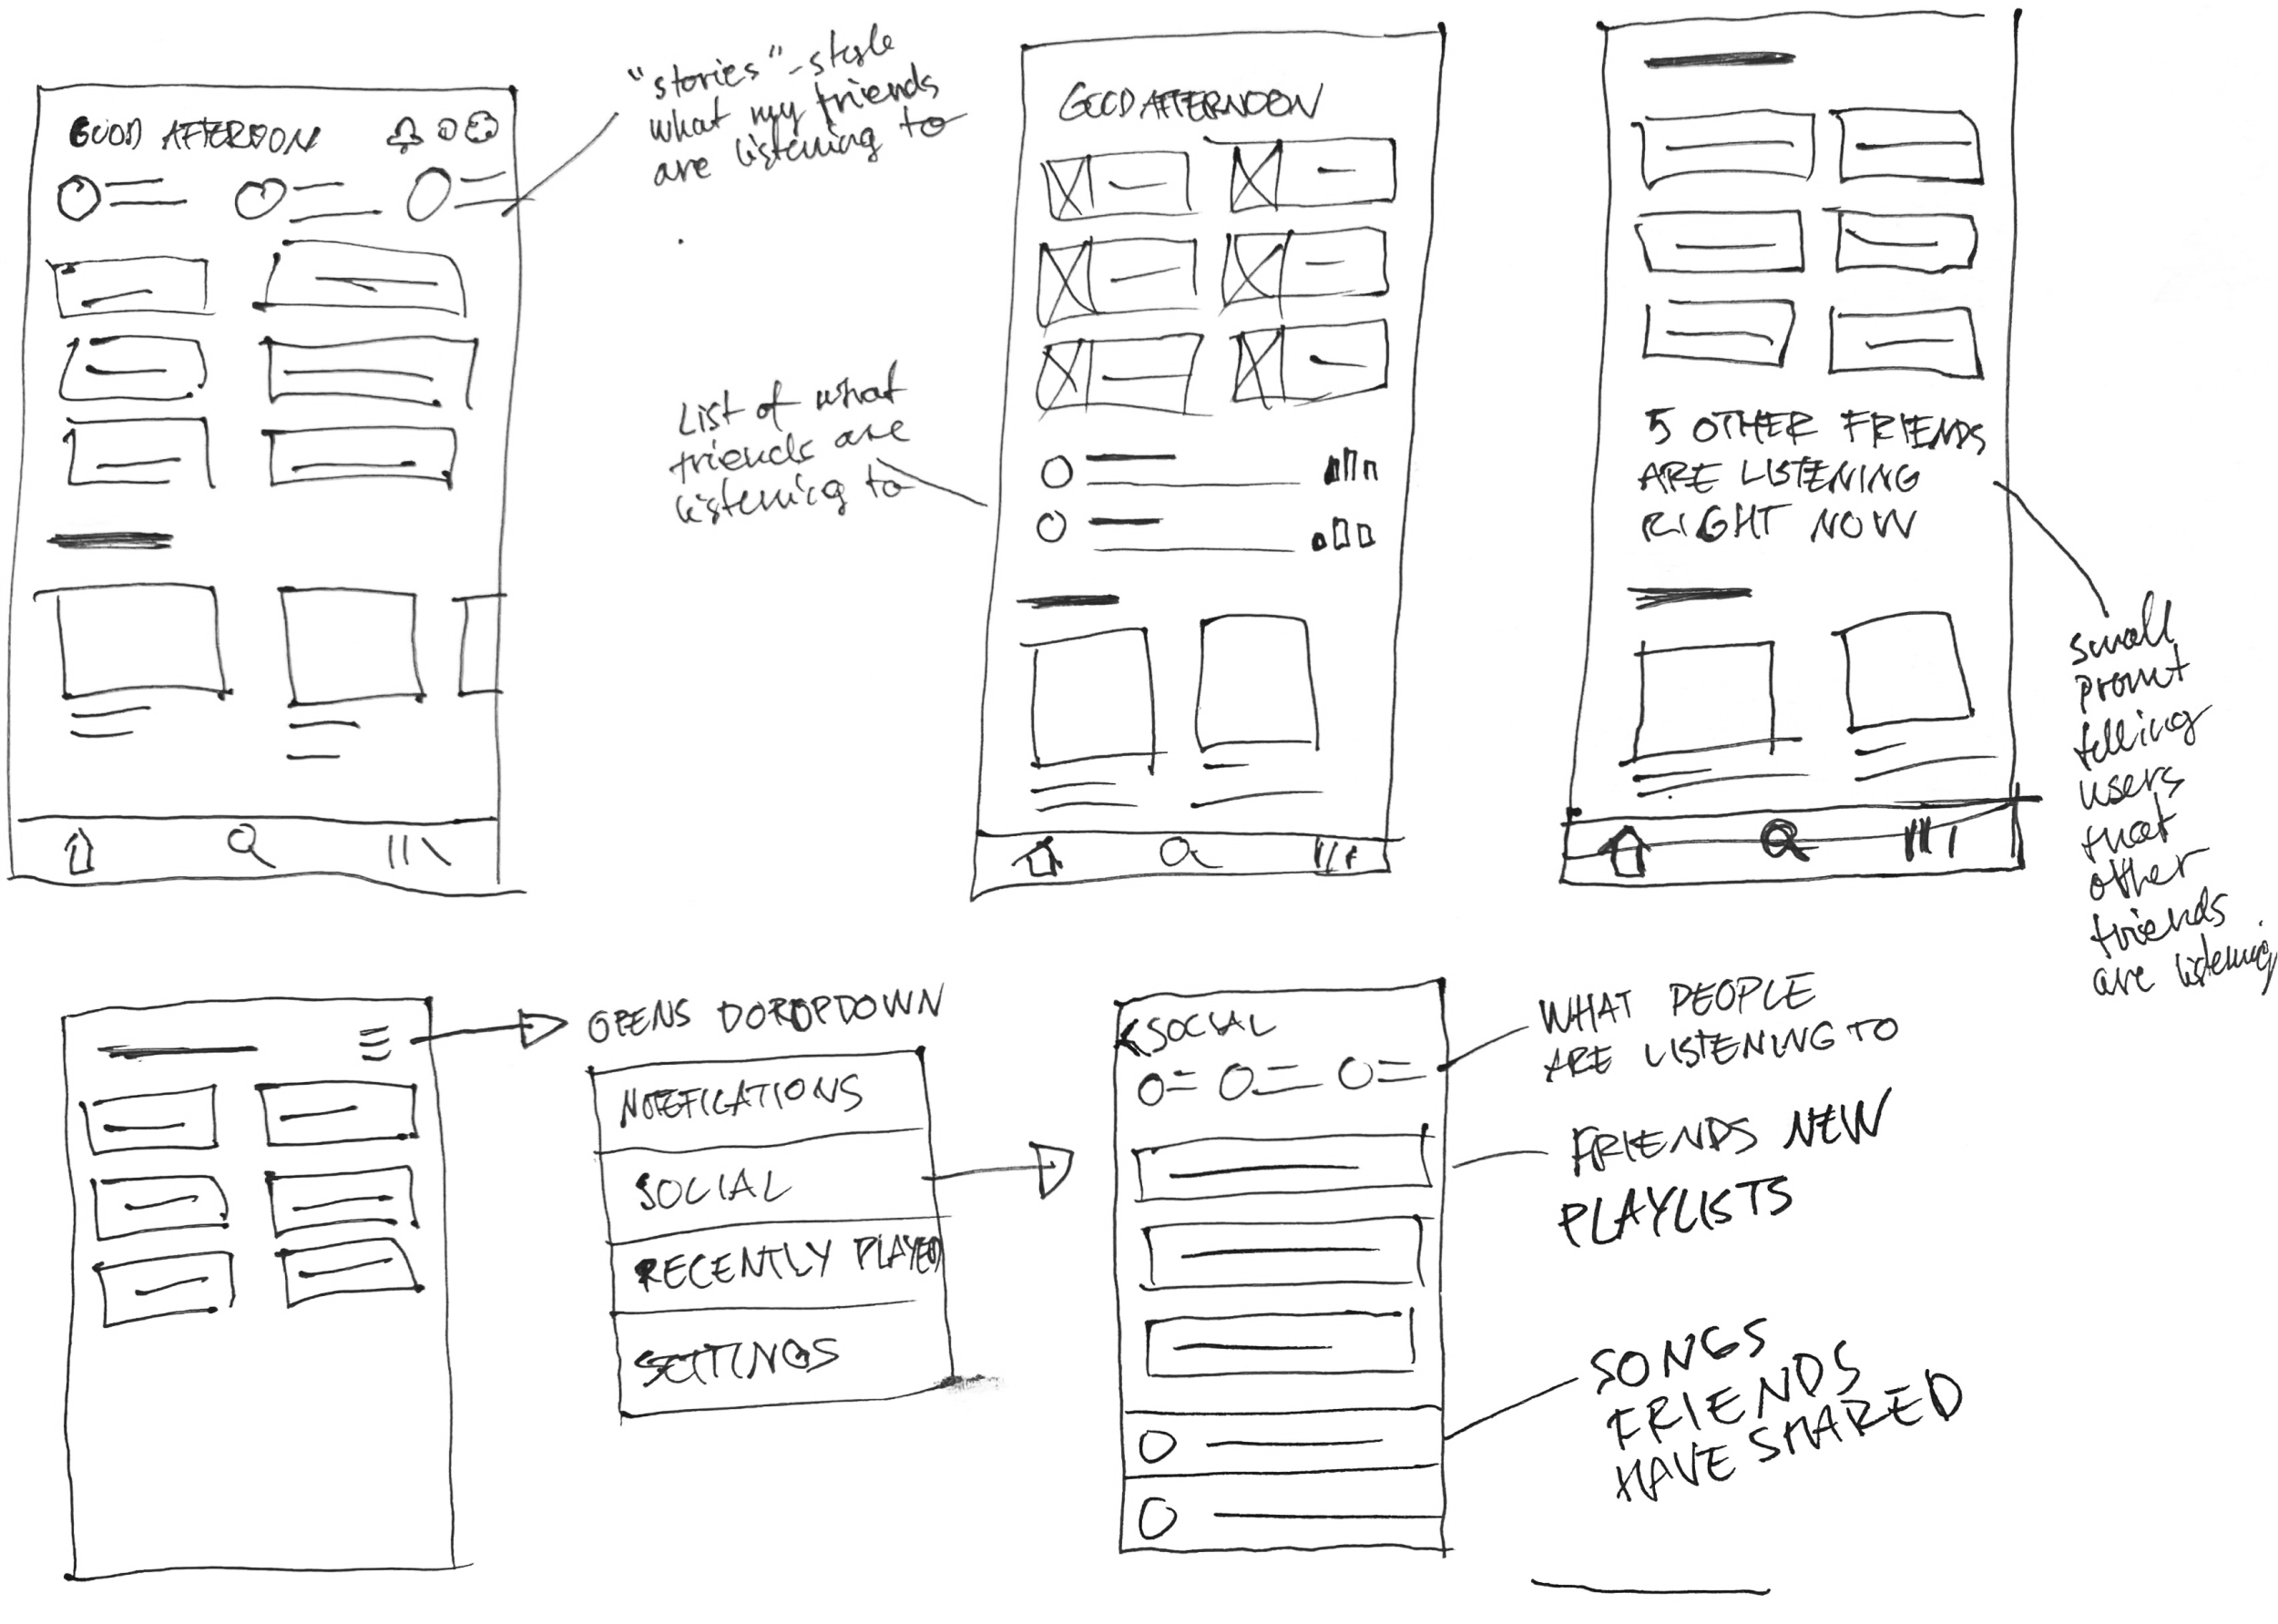 Wireframes of friends' social activities